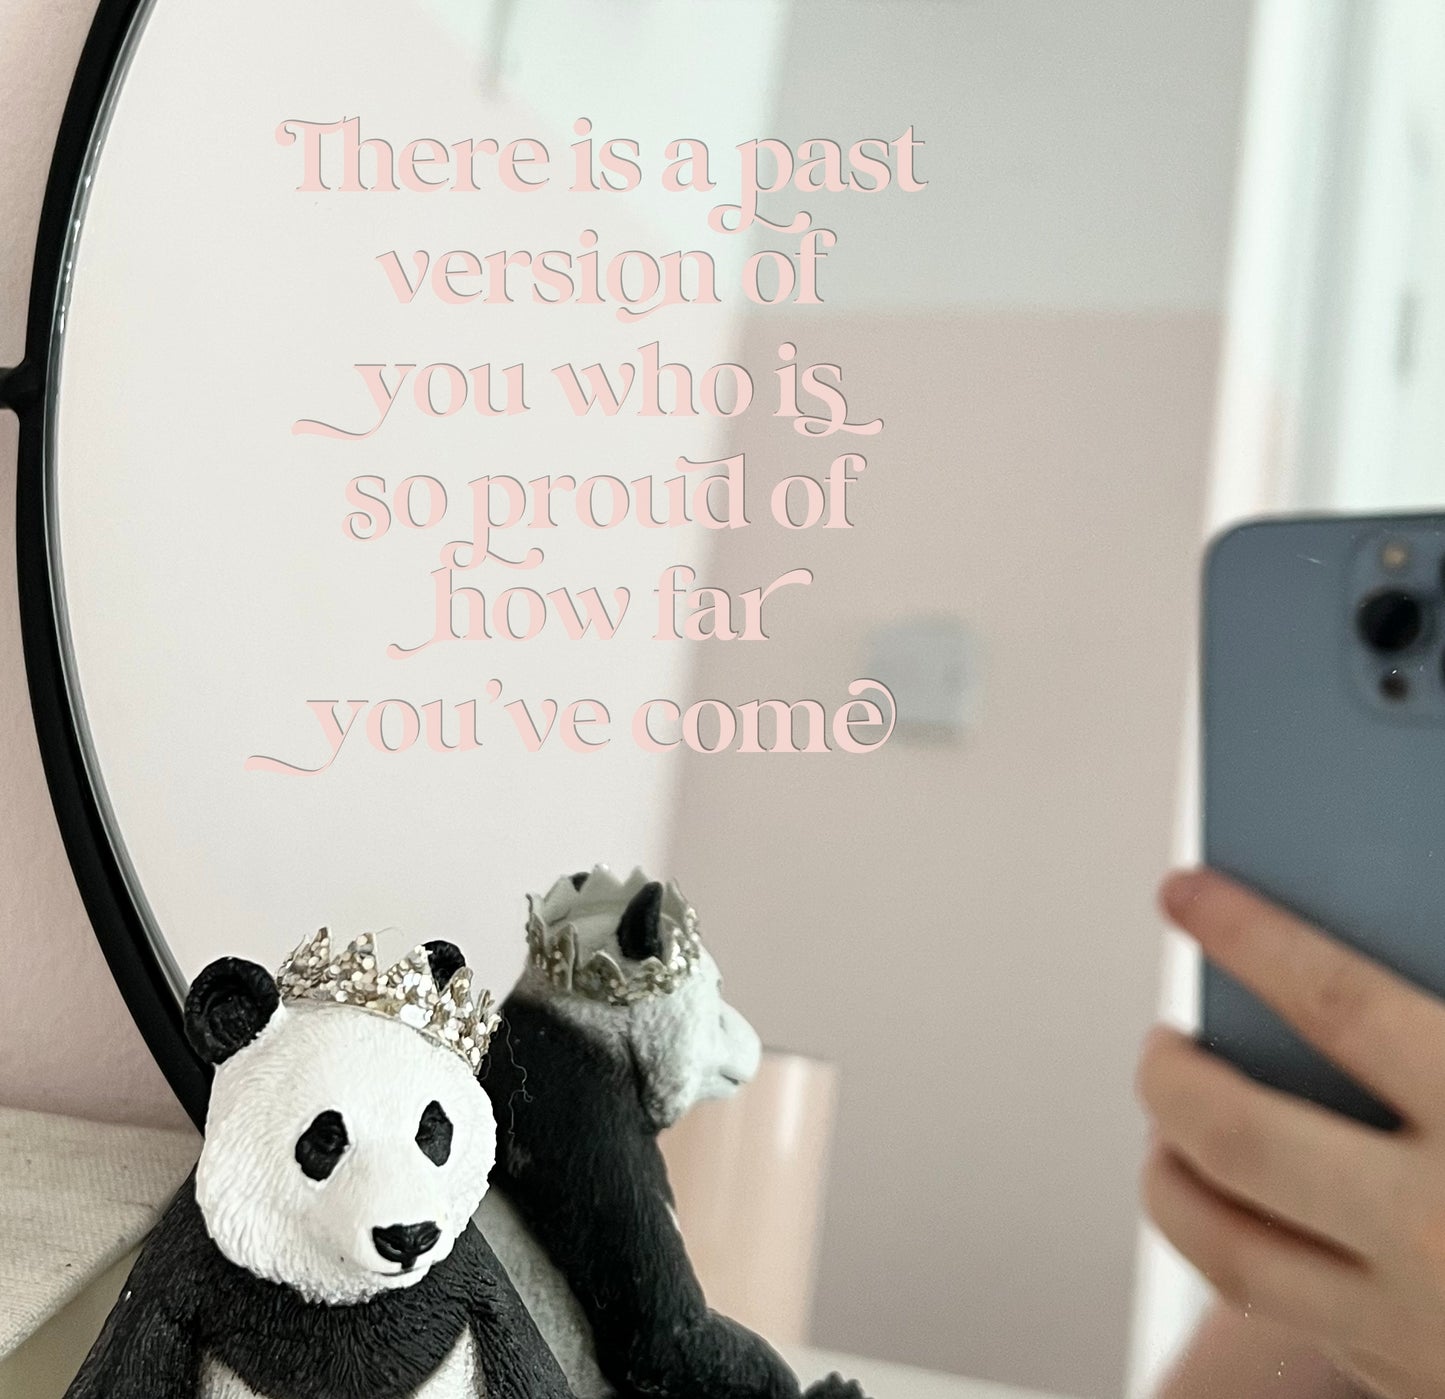 Mirror decal vinyl ✨ - personalised with any wording you would like! Motivational sticker